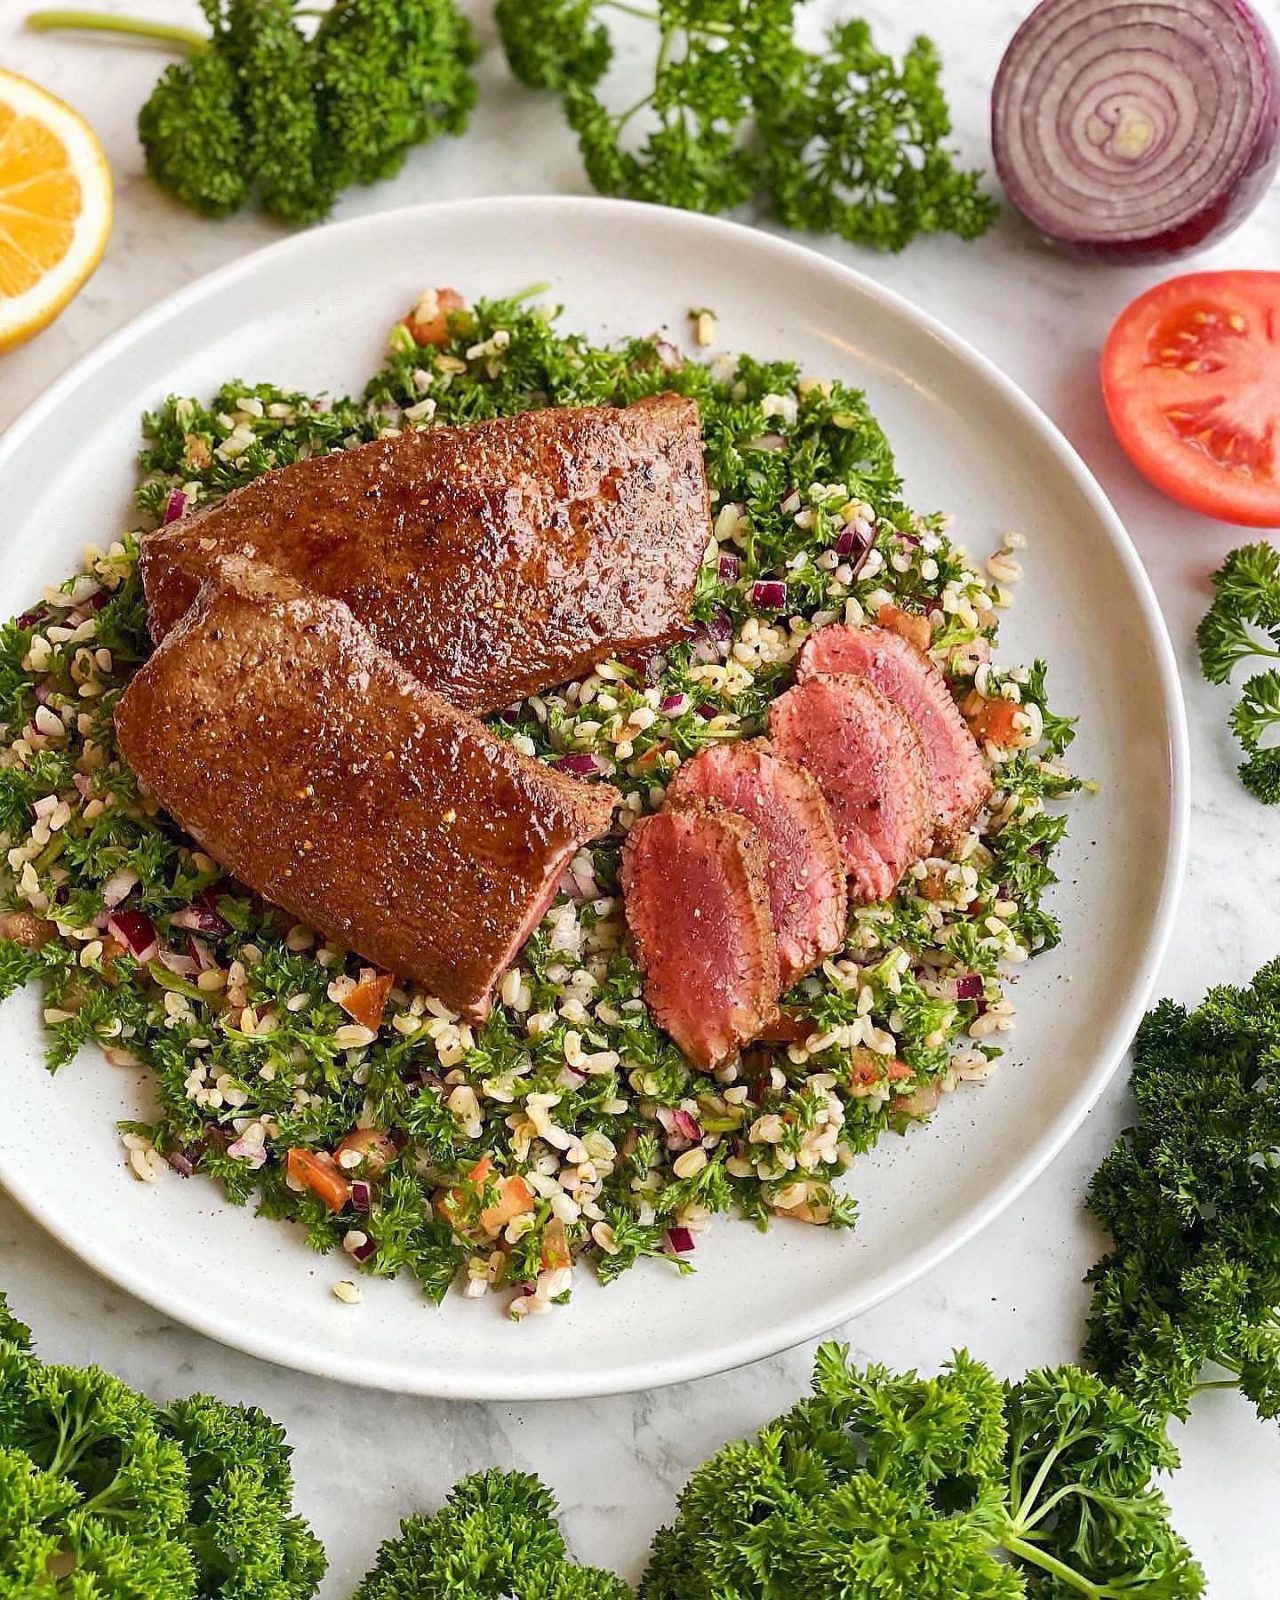 Spiced Lamb Loin Fillets with Tabbouleh